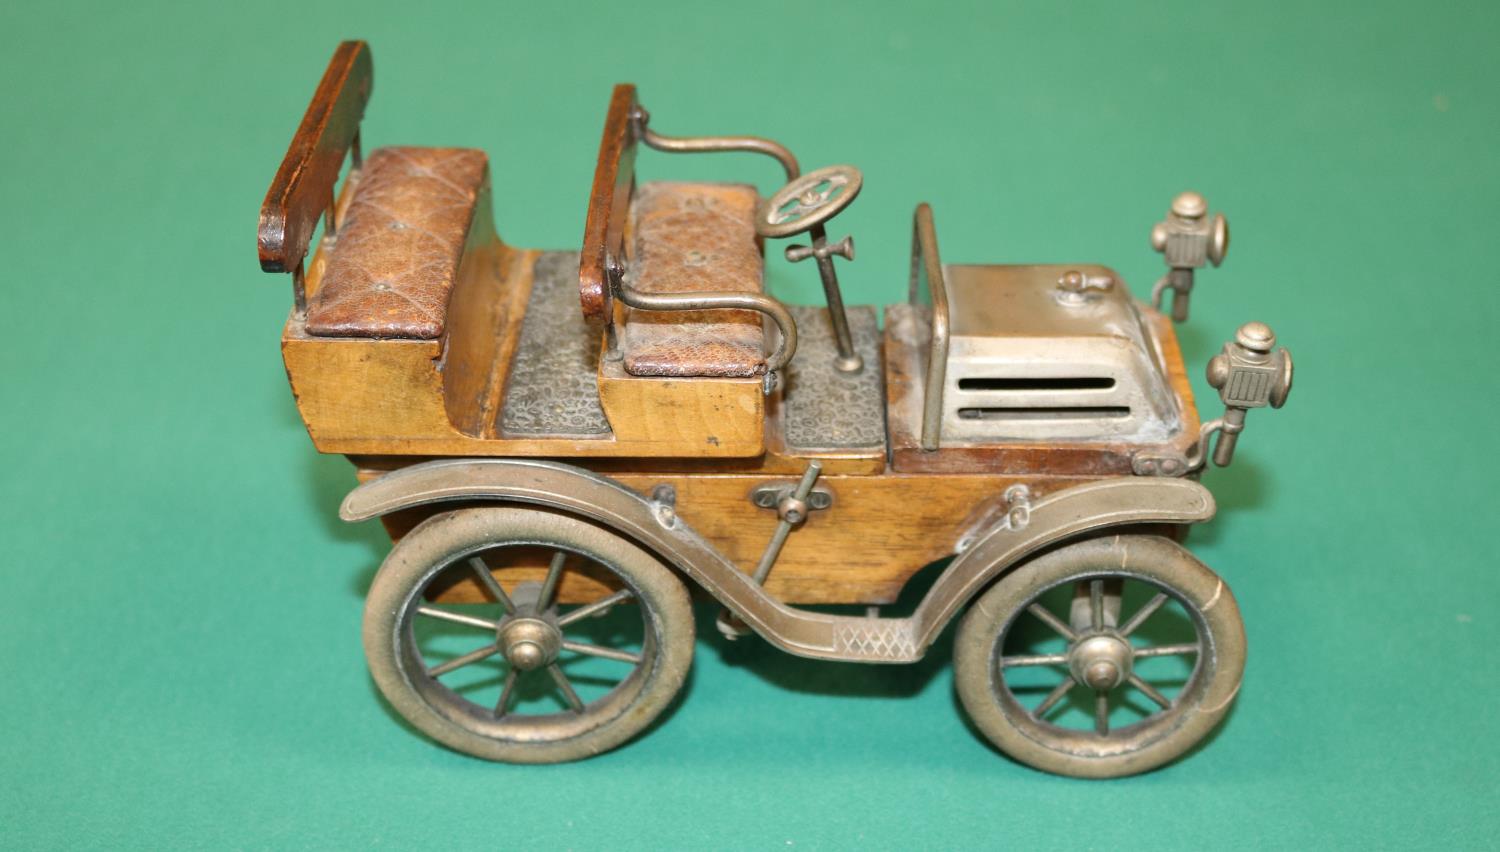 A rare Earnst Plank German Desk Display car for holding Cigarettes and matches, possibly dating from - Image 3 of 4